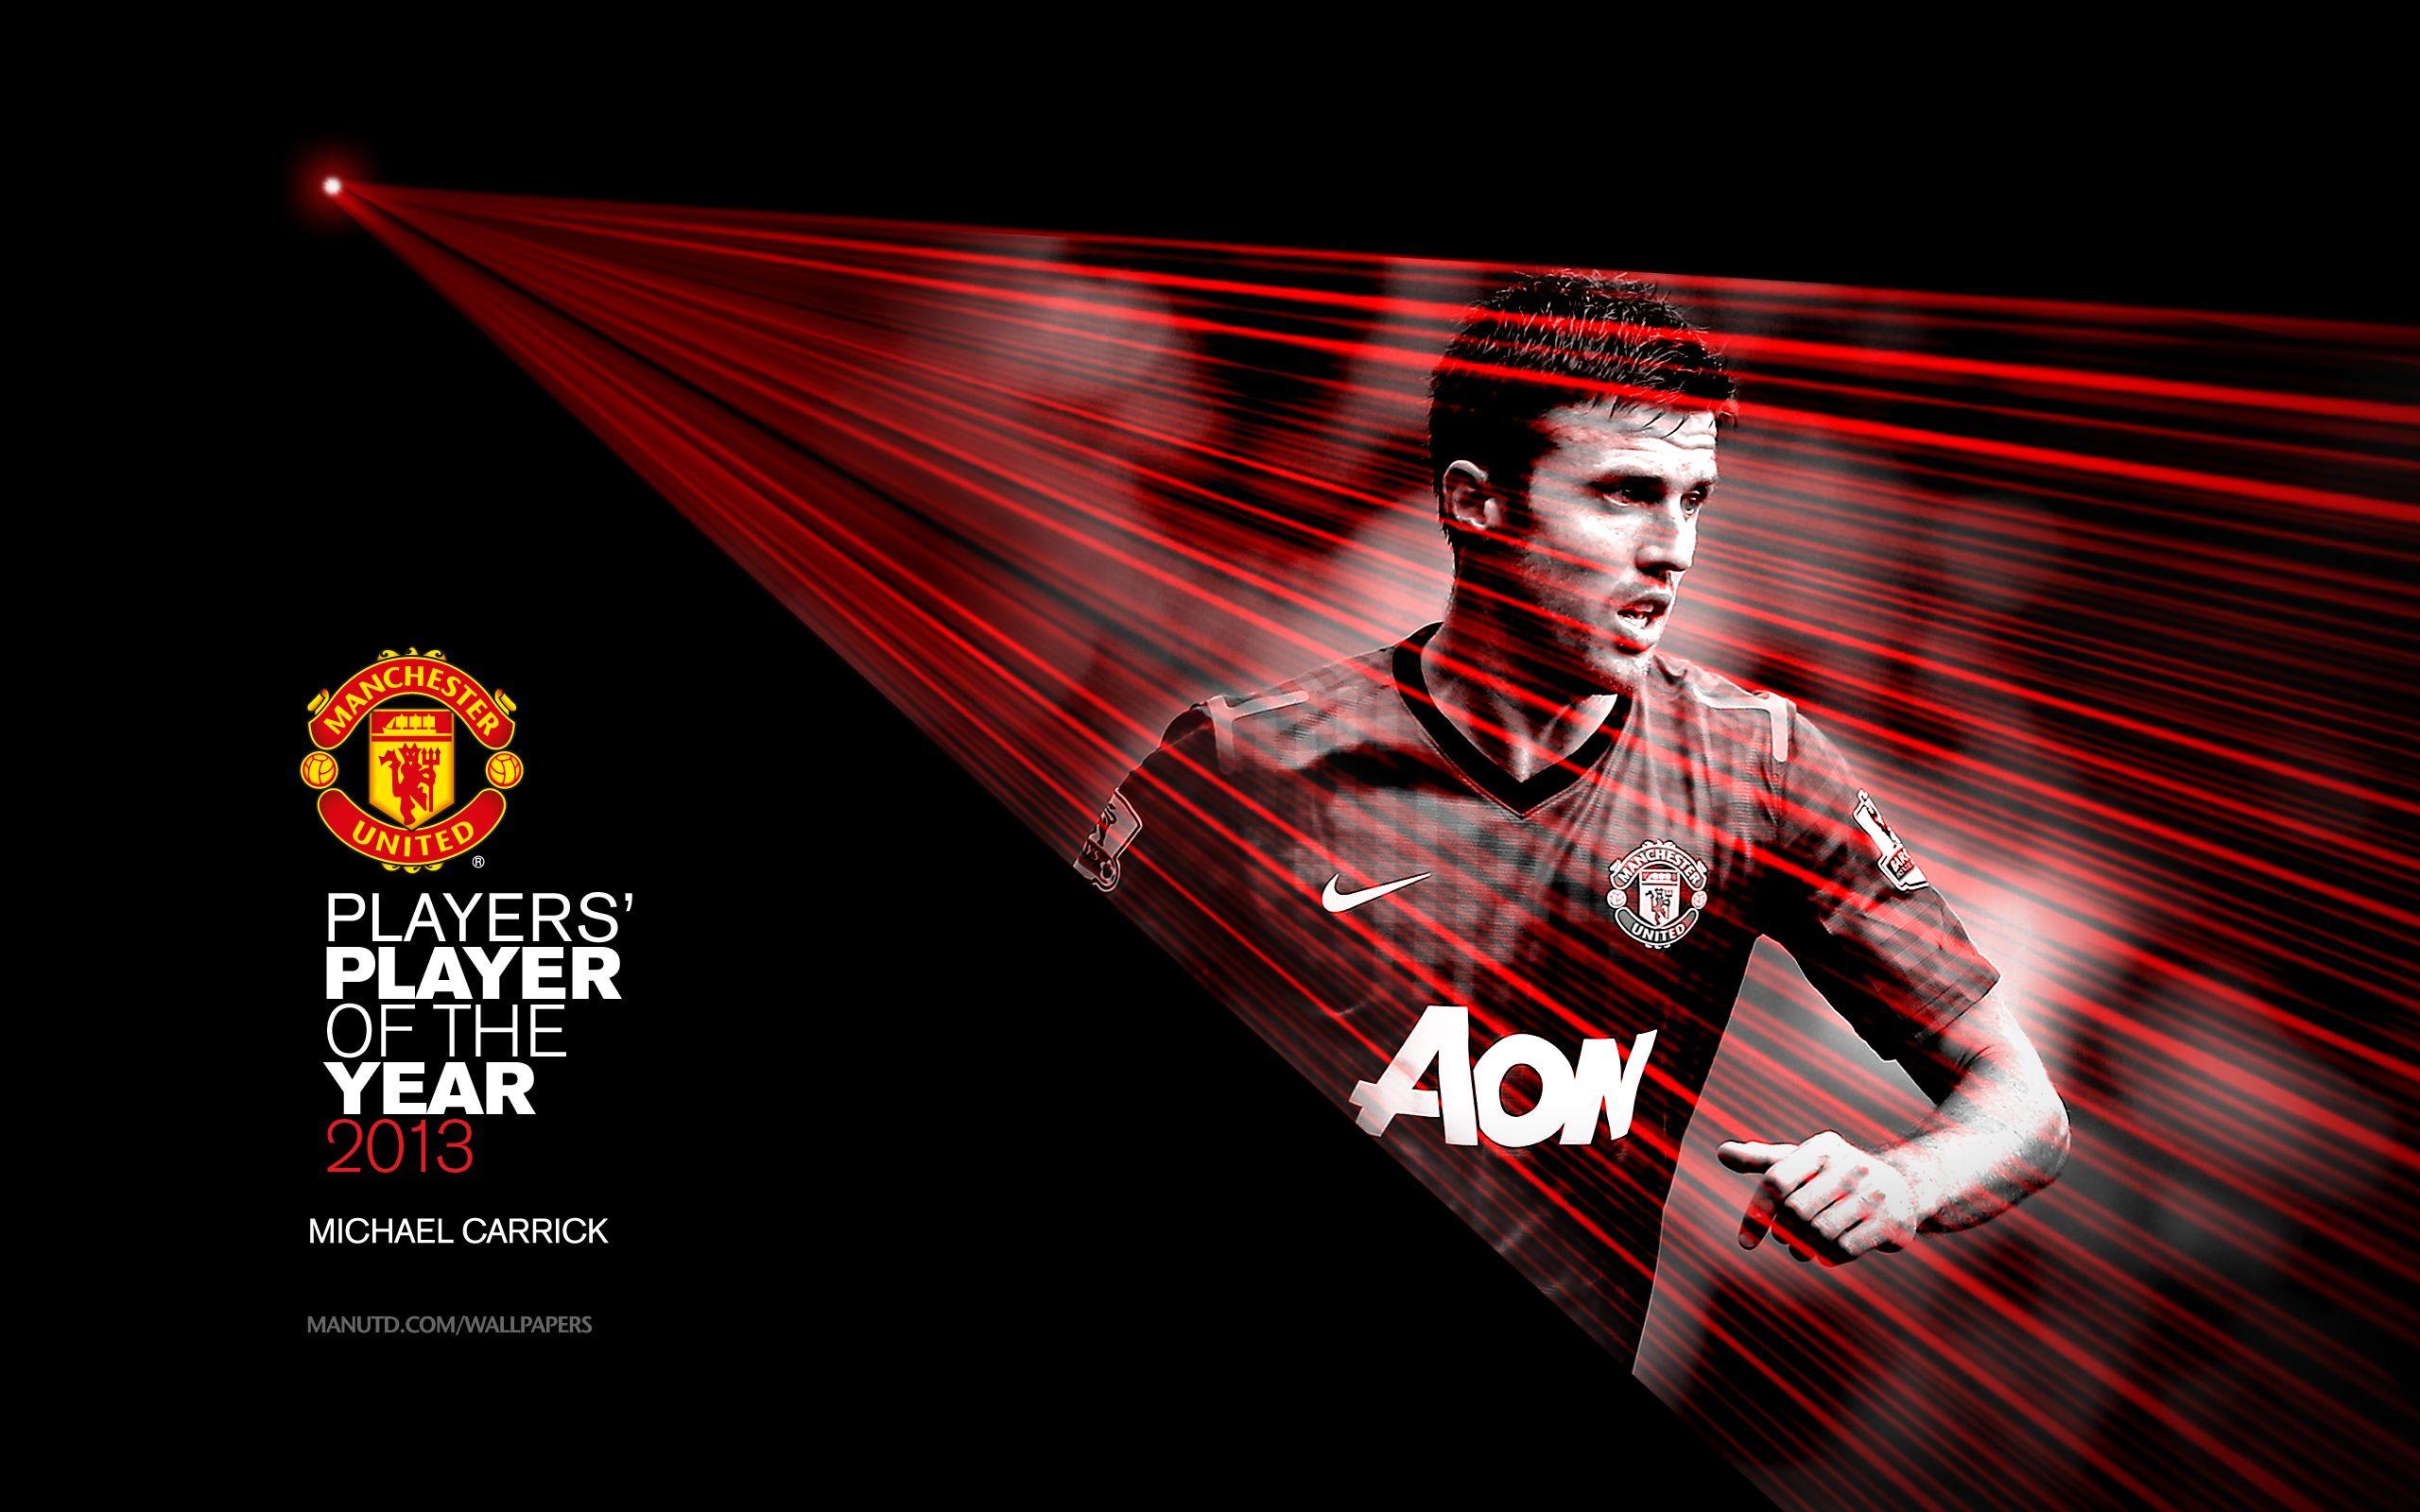 Player of The Year and Goal of The Season. Manchester United